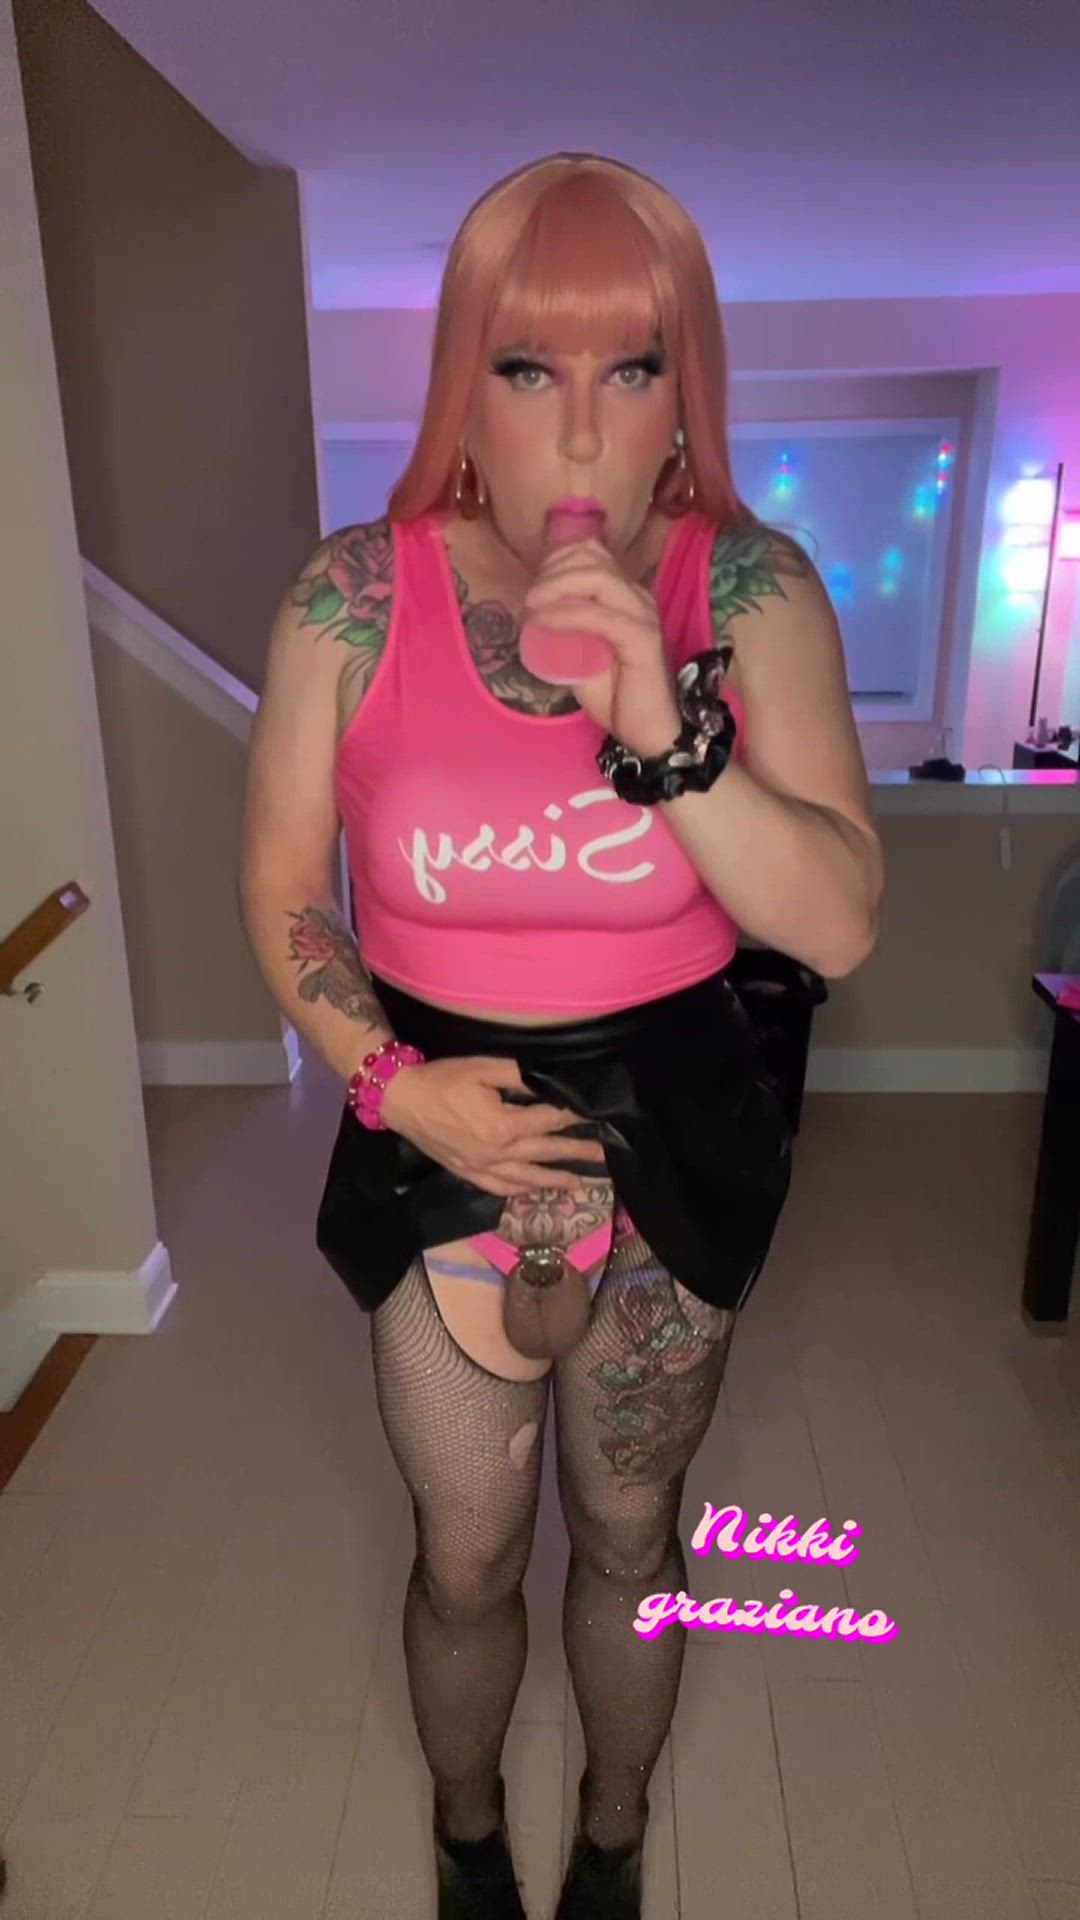 Chastity porn video with onlyfans model Nikki graziano <strong>@delilahandnikki</strong>